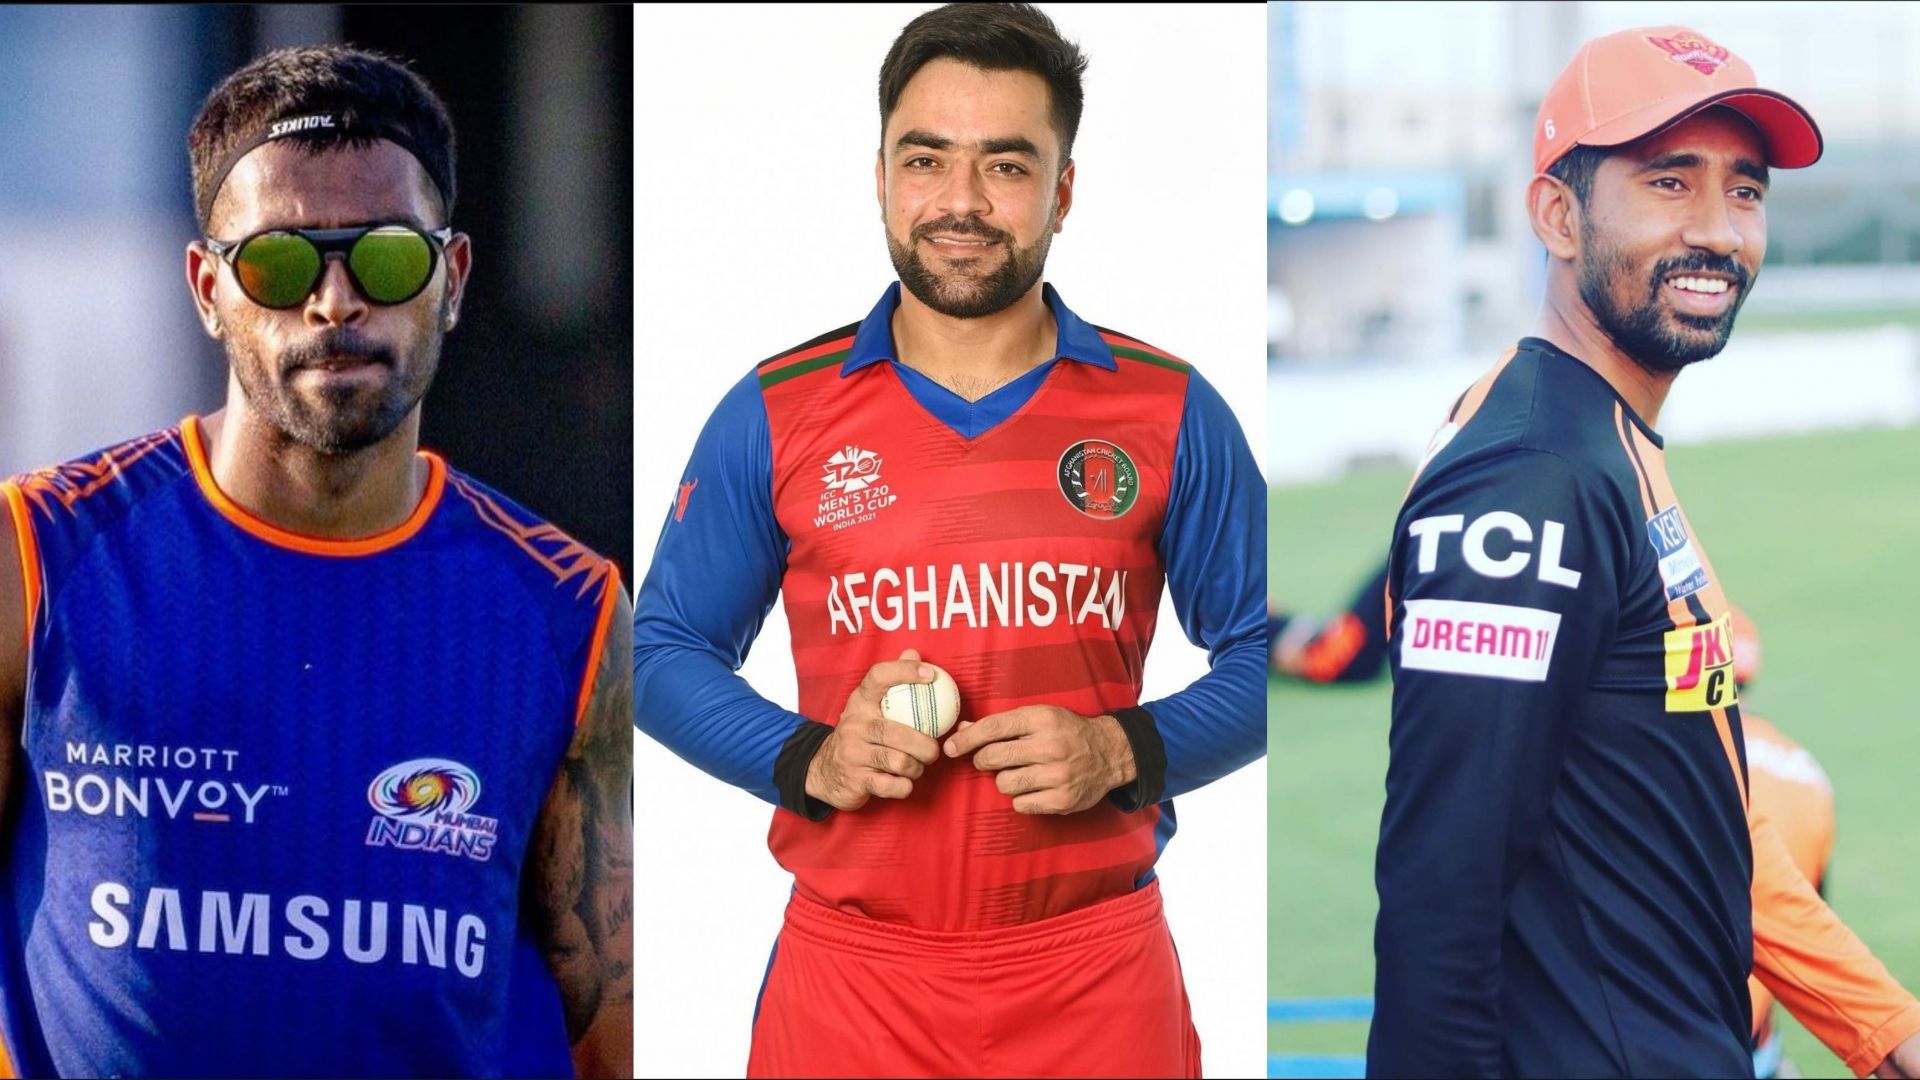 Gujarat Titans have stacked up their IPL 2022 squad with some big names